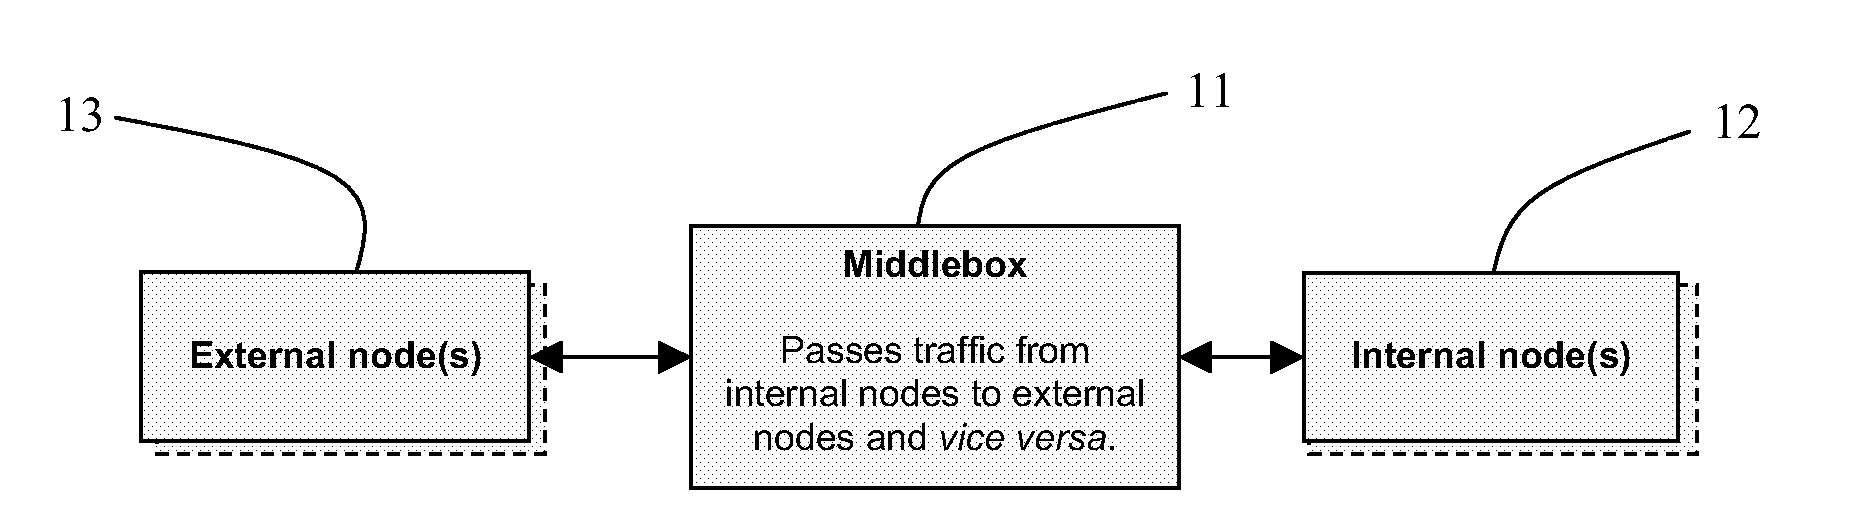 IP Address Distribution in Middleboxes